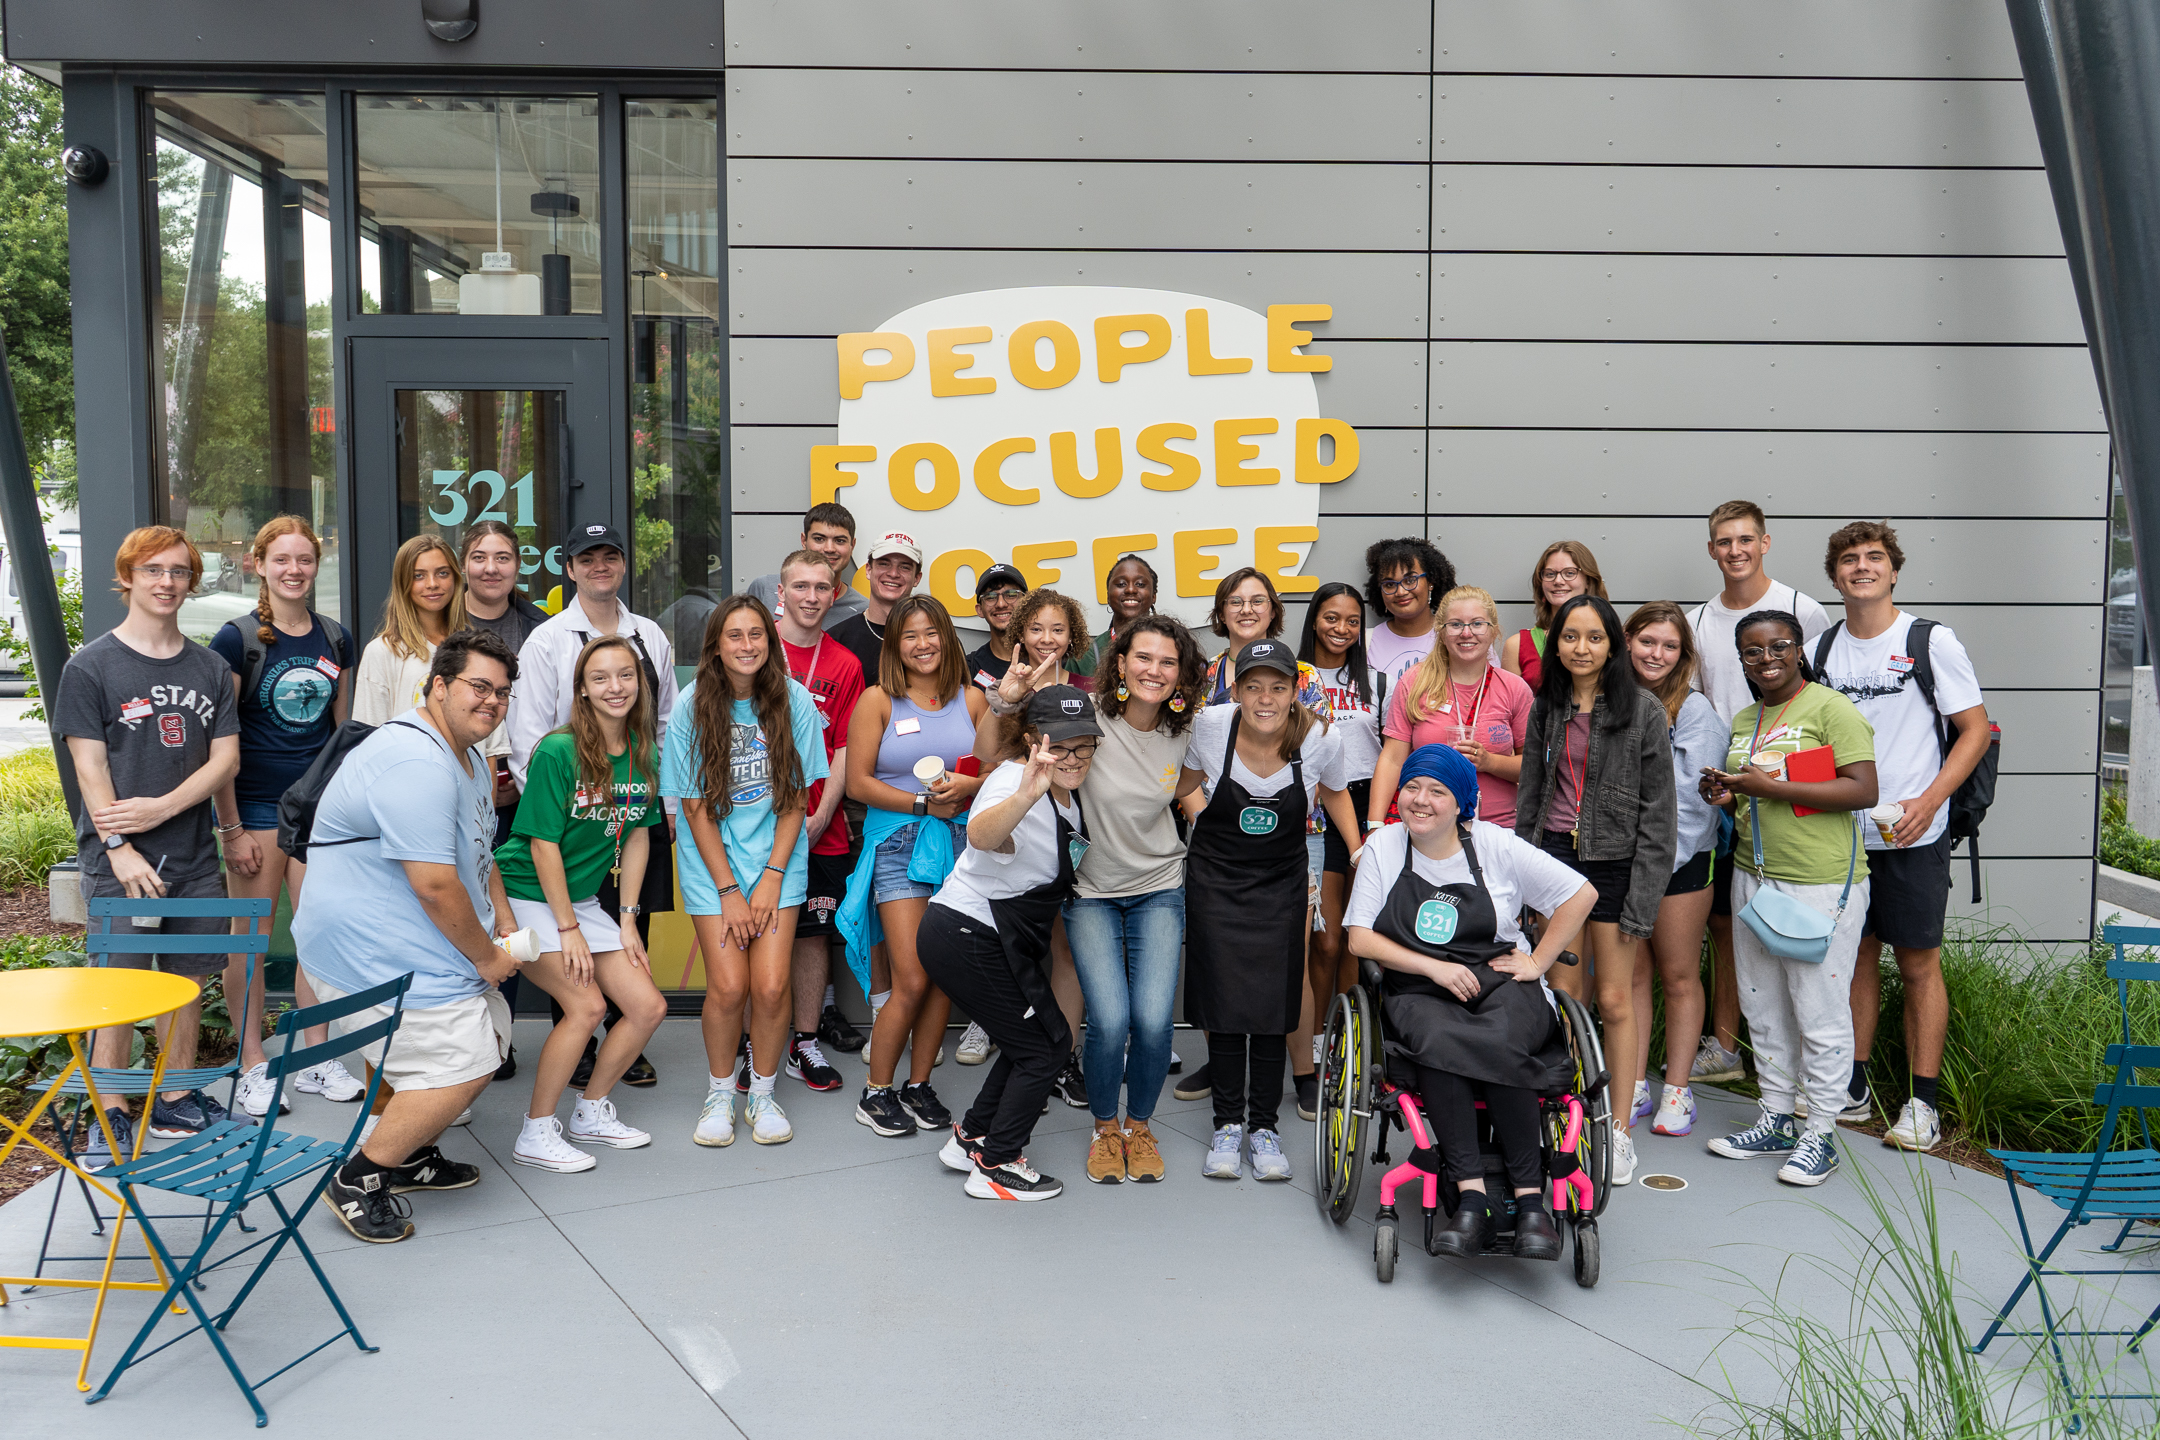 Image depicts a large group of Honors Program students in front of "People Focused Coffee," with some of that business's staff, in downtown Raleigh, NC during the Honors Program's Rooted in Raleigh summer opportunity.